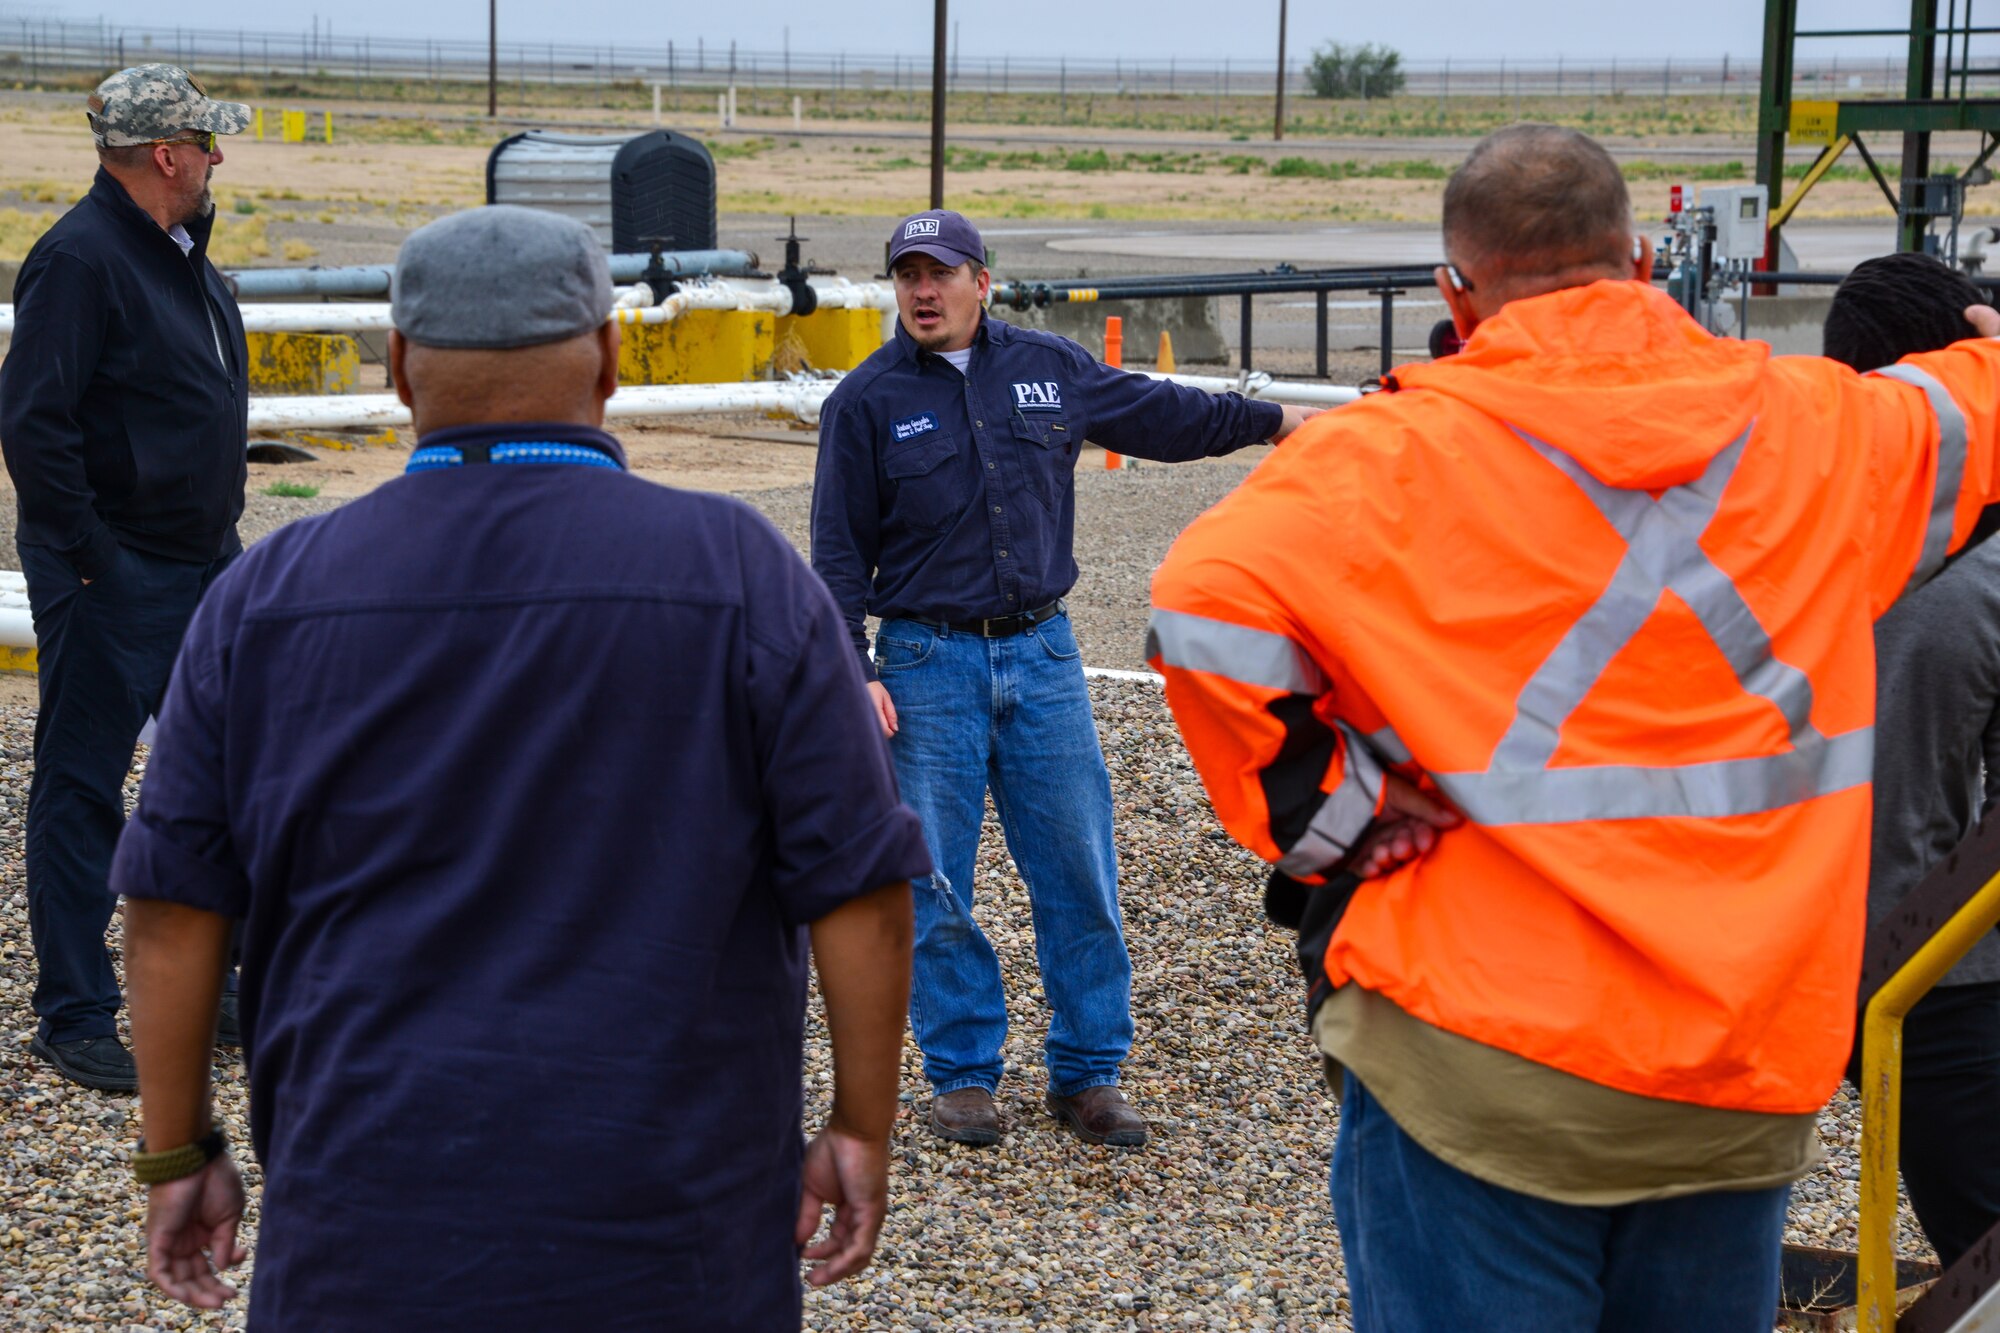 Man explains spill prevention protocol to a small group of people at Kirtland, AFB.